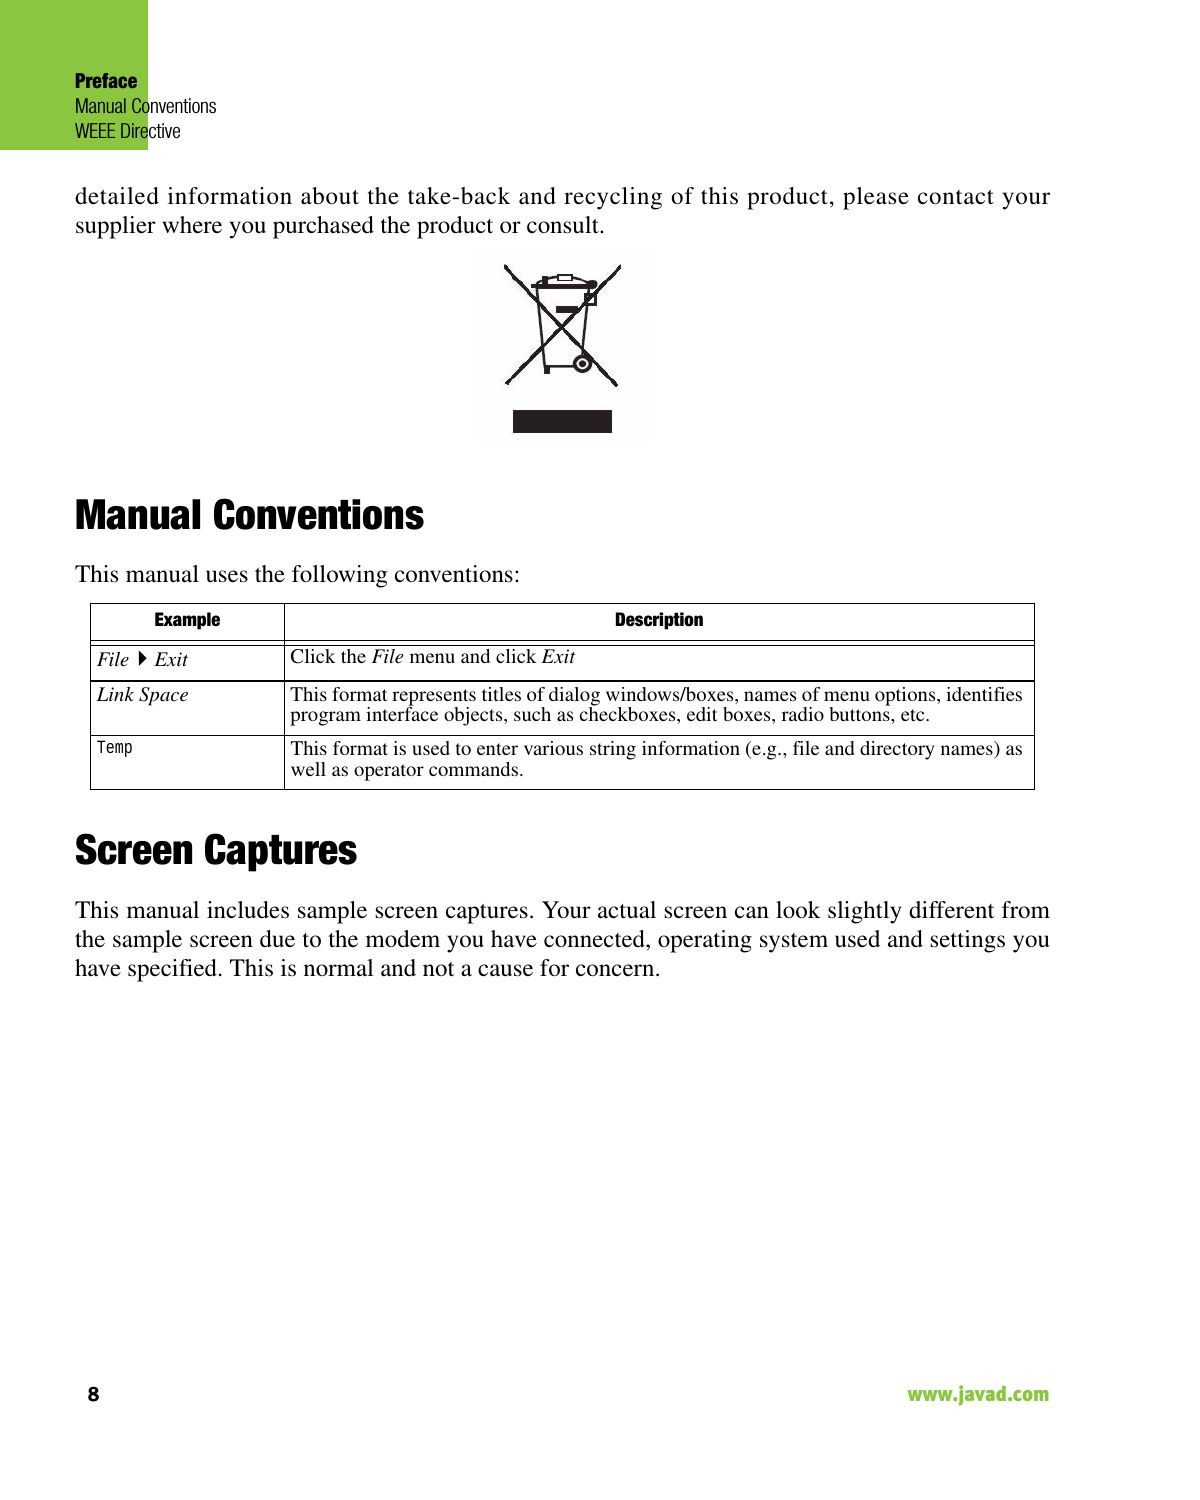 PrefaceManual ConventionsWEEE Directive8                                                                                                                    www.javad.comdetailed information about the take-back and recycling of this product, please contact yoursupplier where you purchased the product or consult. Manual ConventionsThis manual uses the following conventions:Screen CapturesThis manual includes sample screen captures. Your actual screen can look slightly different fromthe sample screen due to the modem you have connected, operating system used and settings youhave specified. This is normal and not a cause for concern.Example DescriptionFileExit Click the File menu and click ExitLink Space This format represents titles of dialog windows/boxes, names of menu options, identifies program interface objects, such as checkboxes, edit boxes, radio buttons, etc.TempThis format is used to enter various string information (e.g., file and directory names) as well as operator commands.